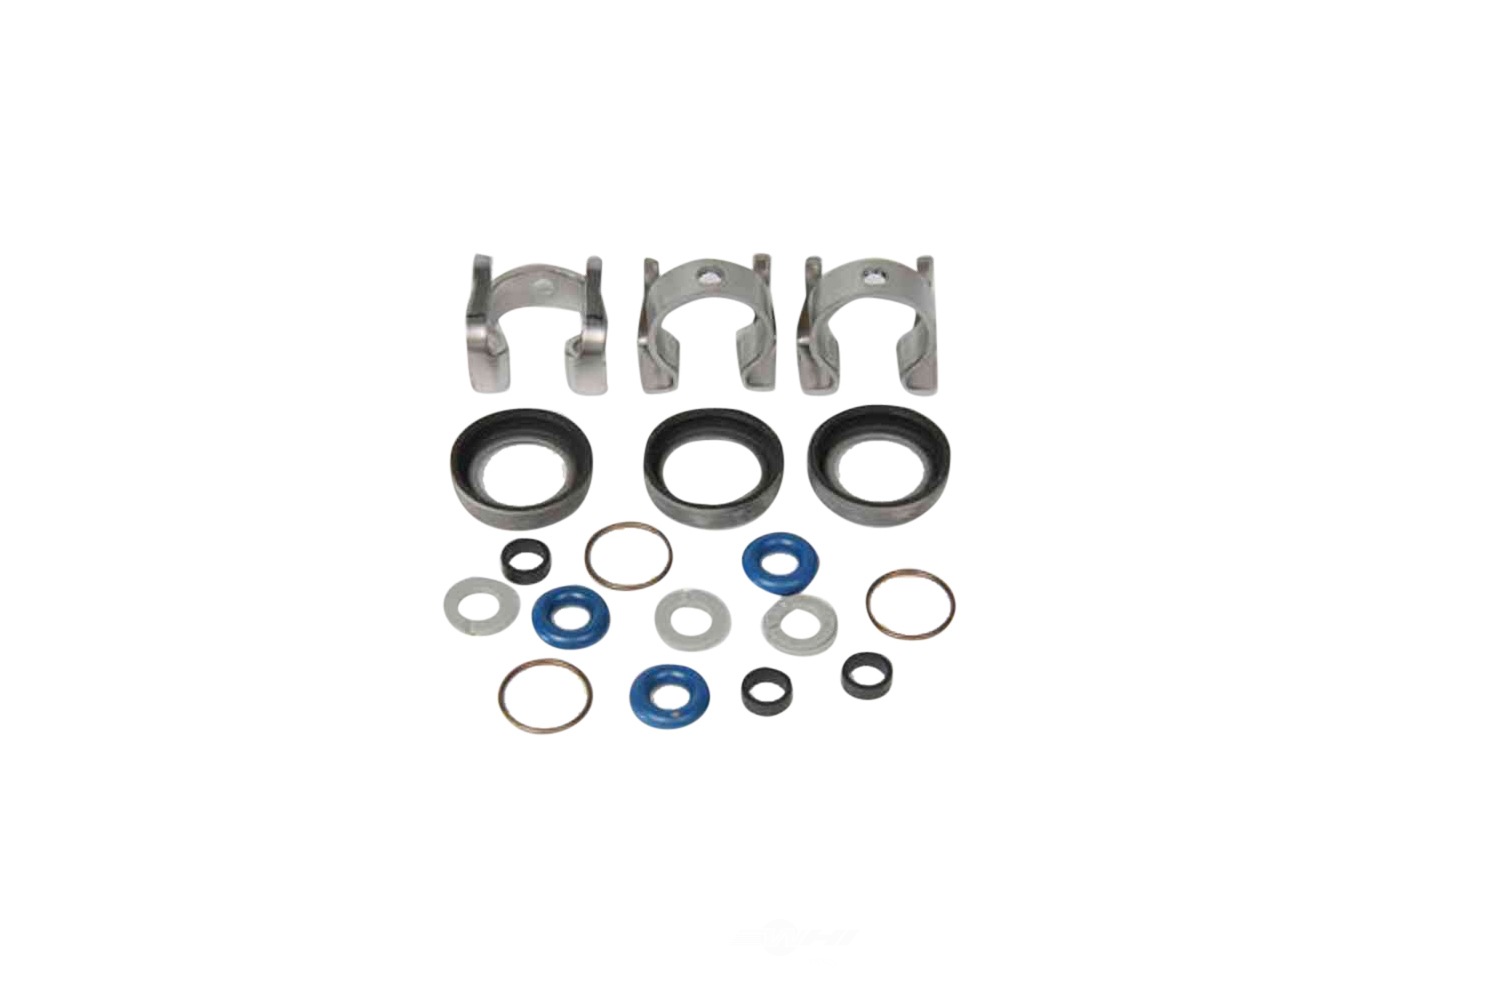 GM GENUINE PARTS - Fuel Injector Seal Kit - GMP 217-3096